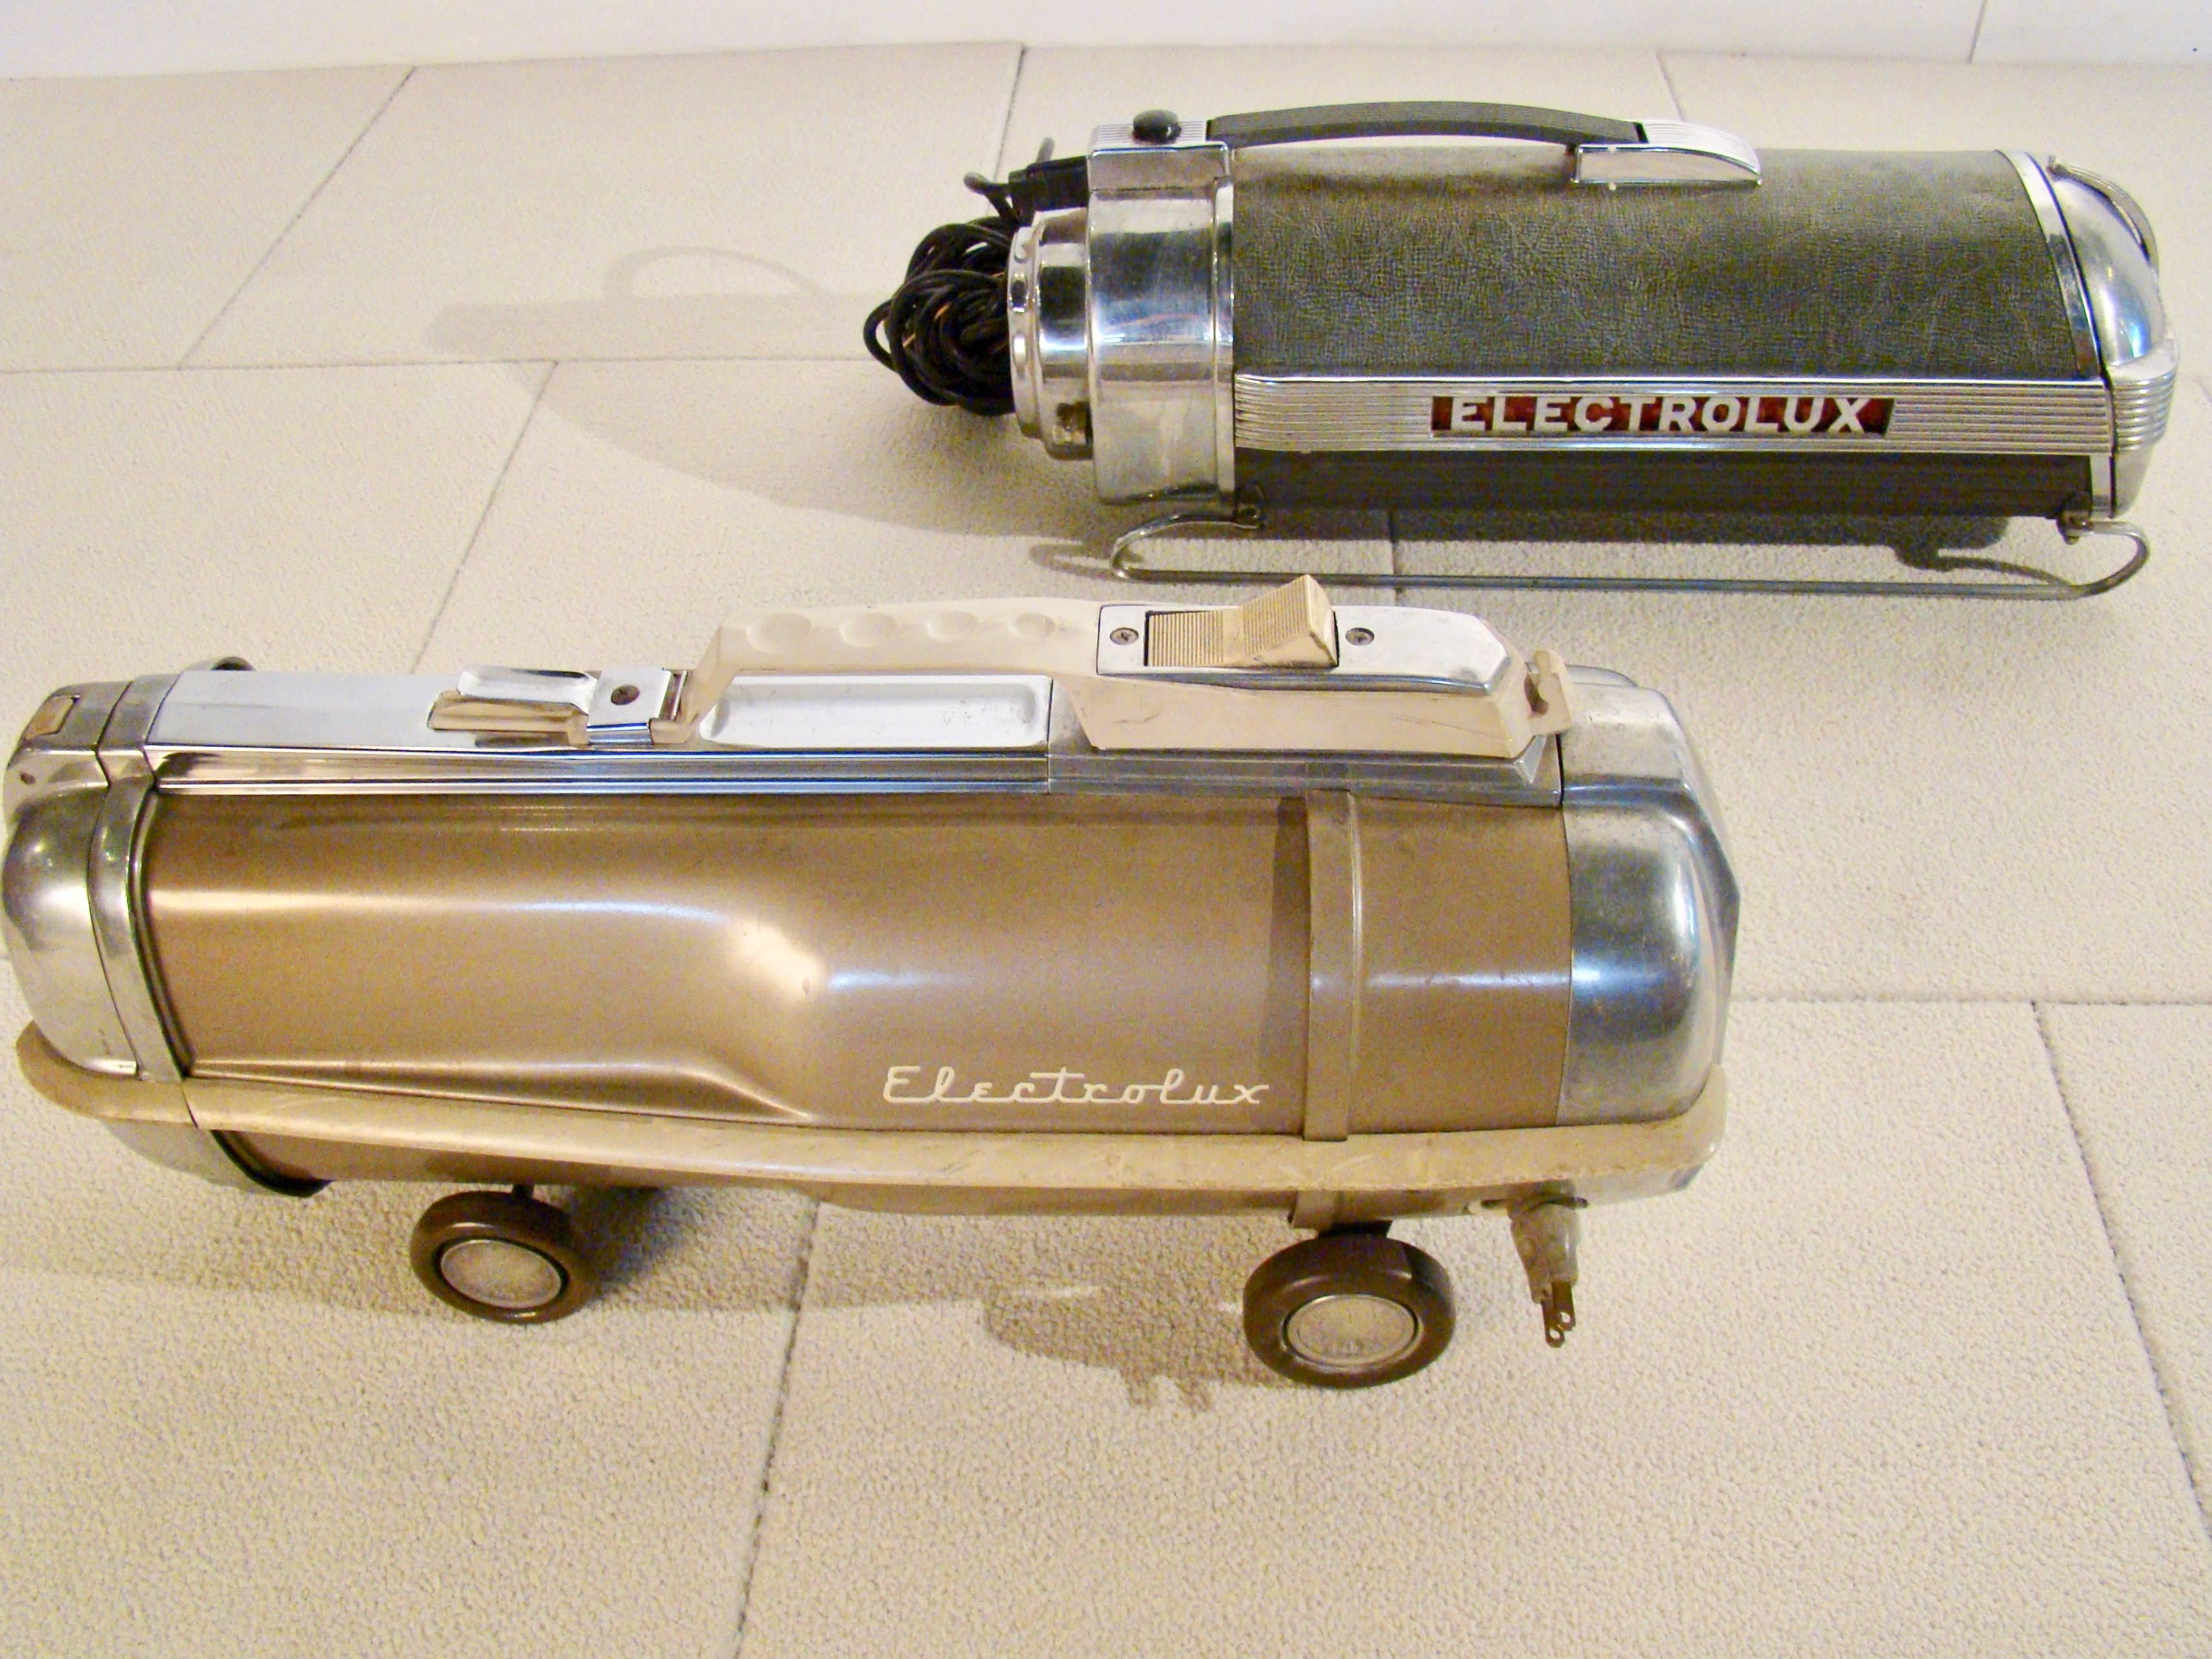 Pair of Machine Age vacuums by Electrolux. In the forefront is Electrolux models 30. The sled base and horizontal speed lines and plating create the illusion of perpetual motion. This model was designed by Industrial legend Lurelle Guild in 1937 and